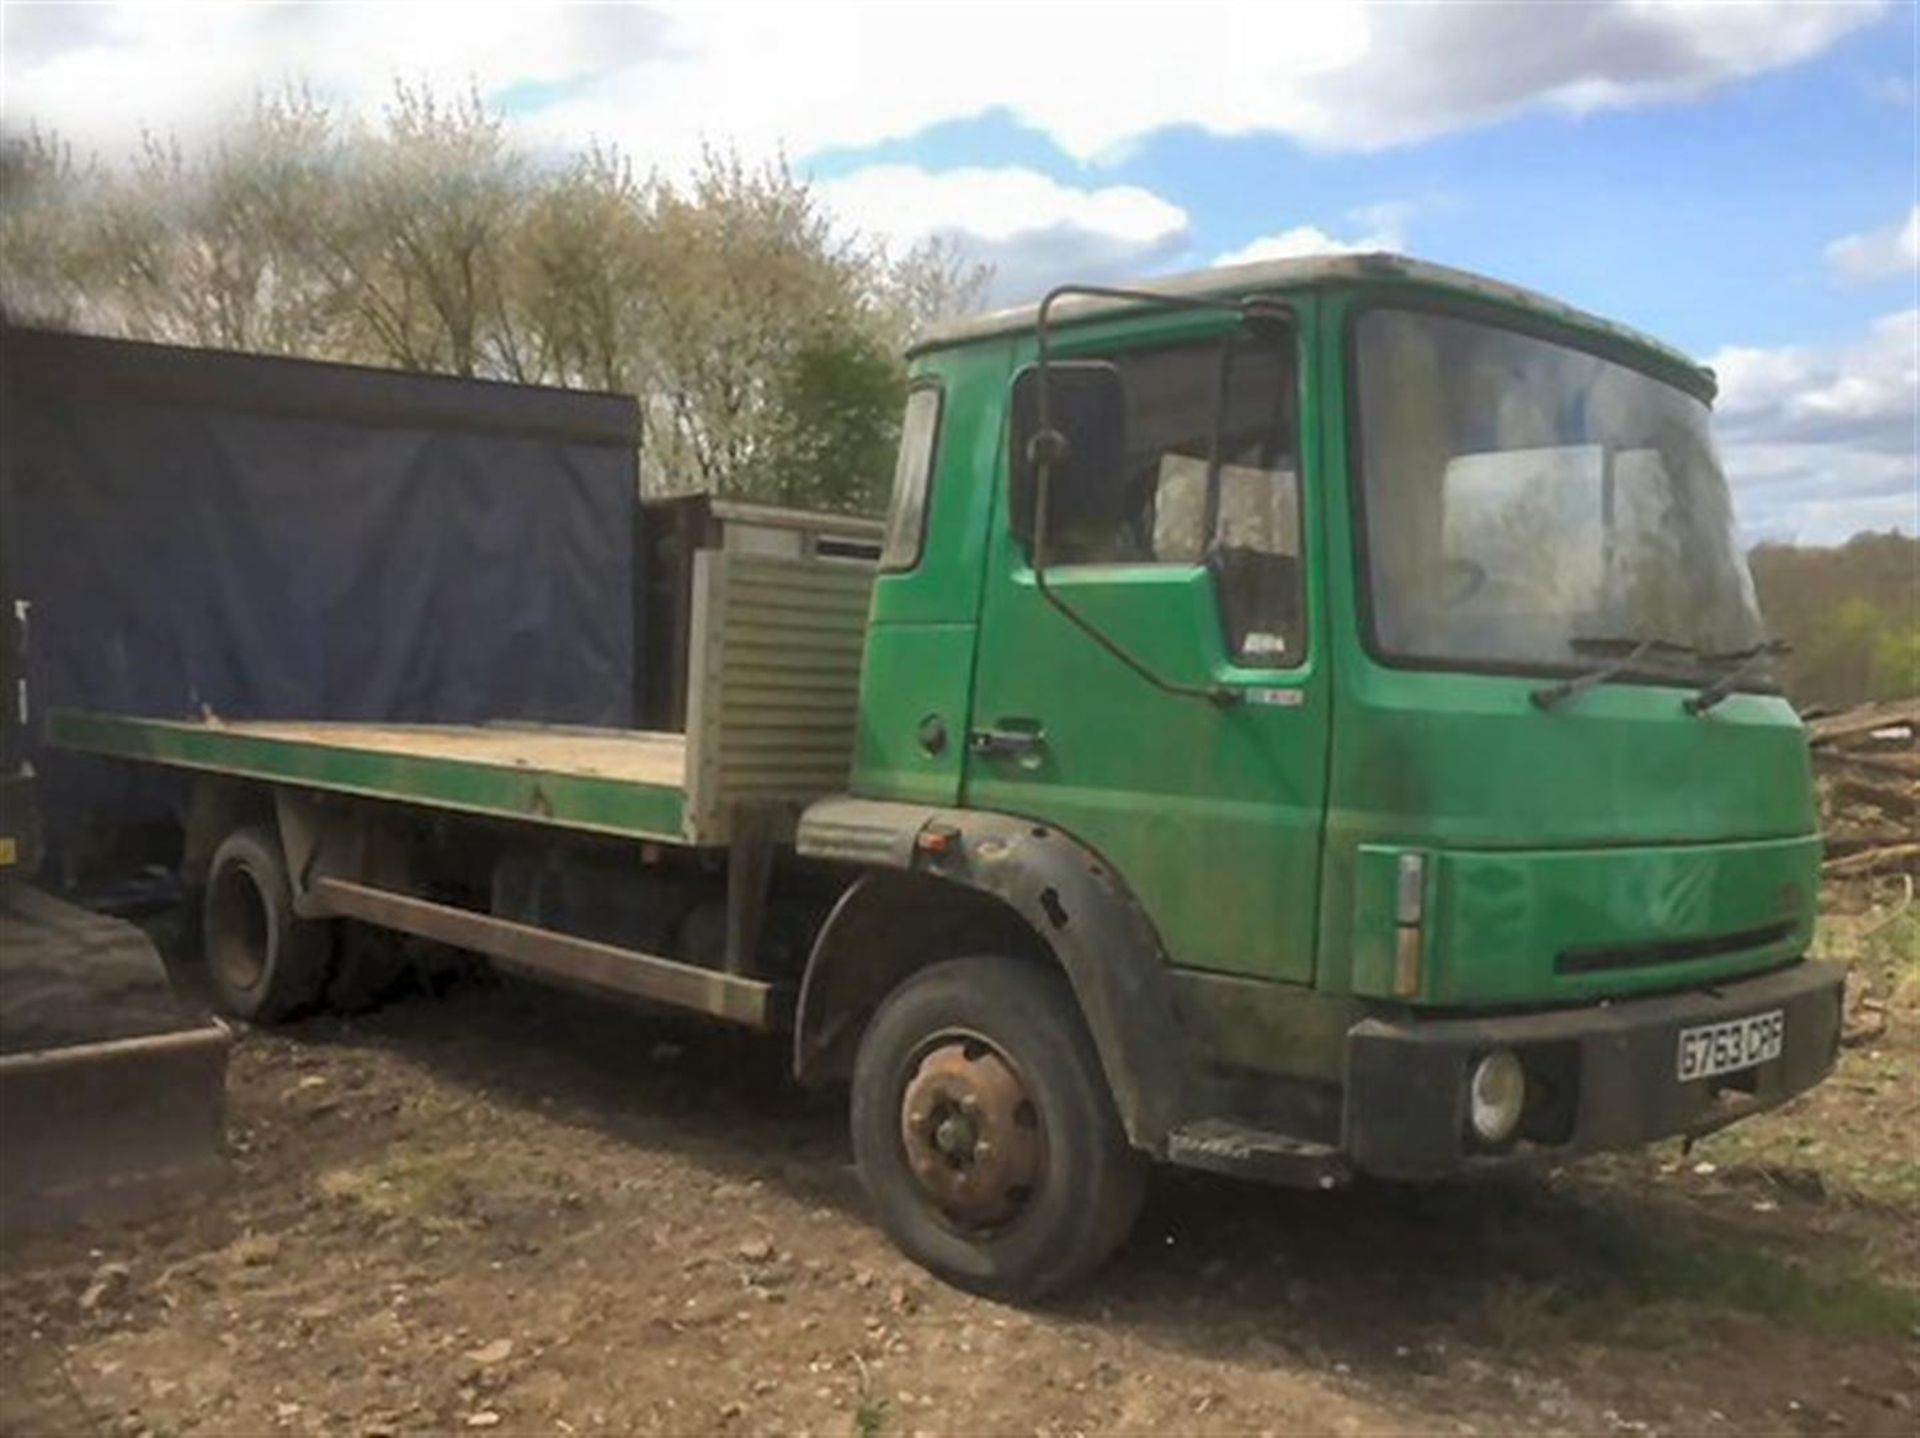 1990 Bedford TL 8-14 Flatbed Reg. No. G763 CPF Chassis No. SBEDGM3DGKT202708 The 6 cylinder 6